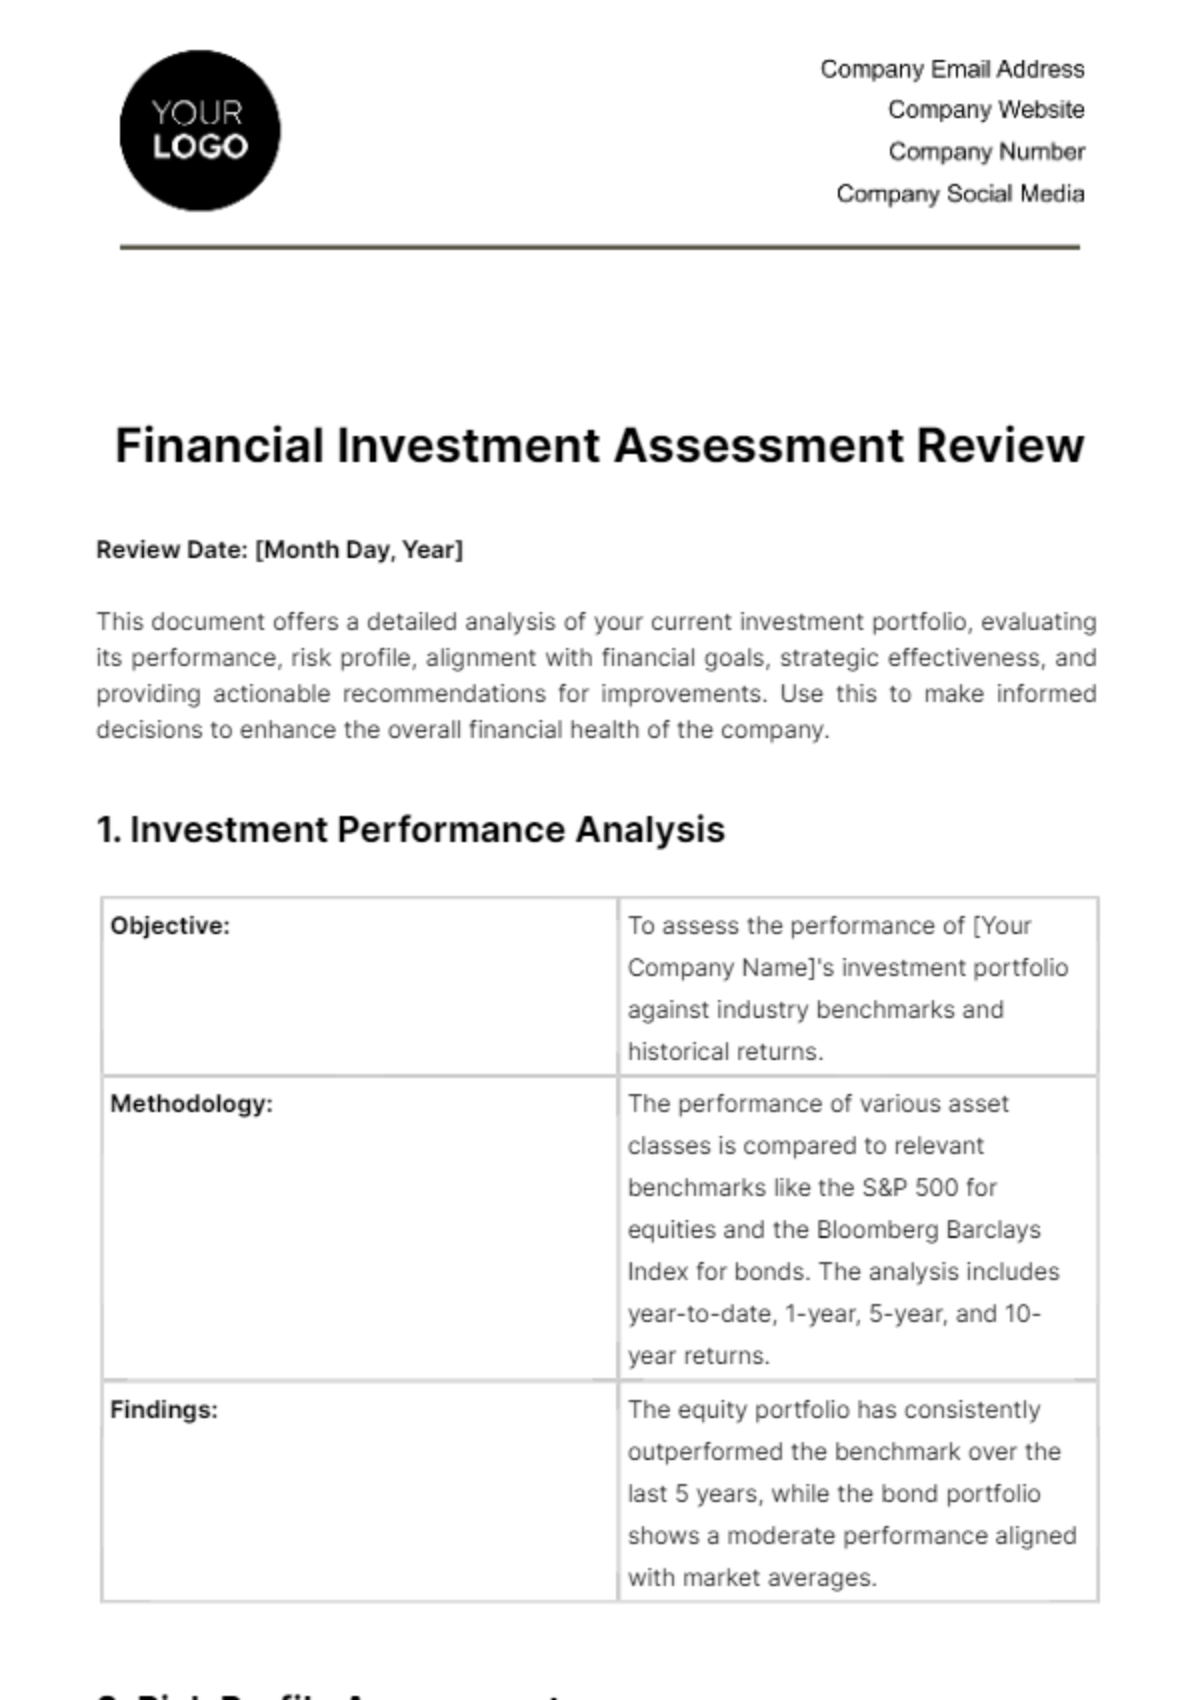 Financial Investment Assessment Review Template